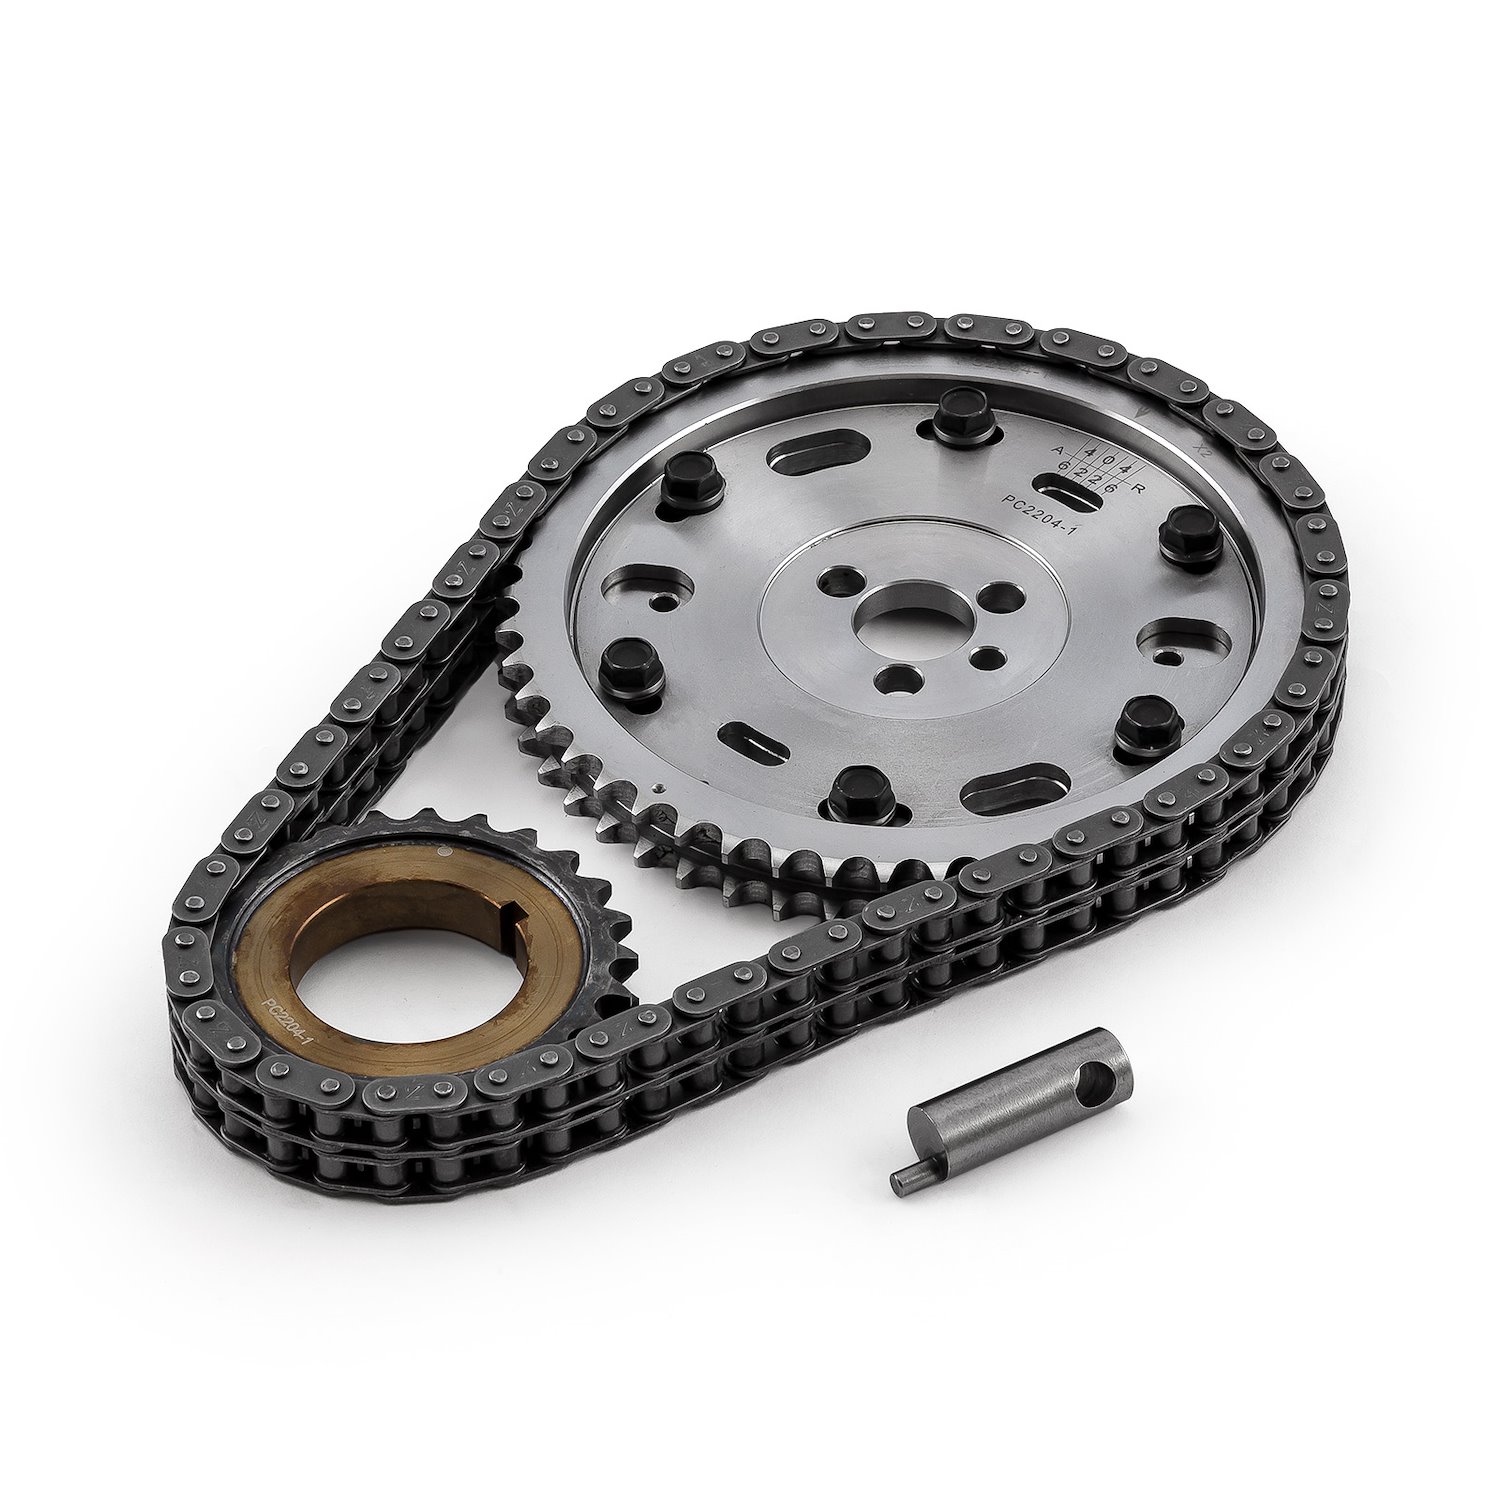 Chevy BBC 454 Double Roller 2pc Adj Billet Steel Timing Chain Kit